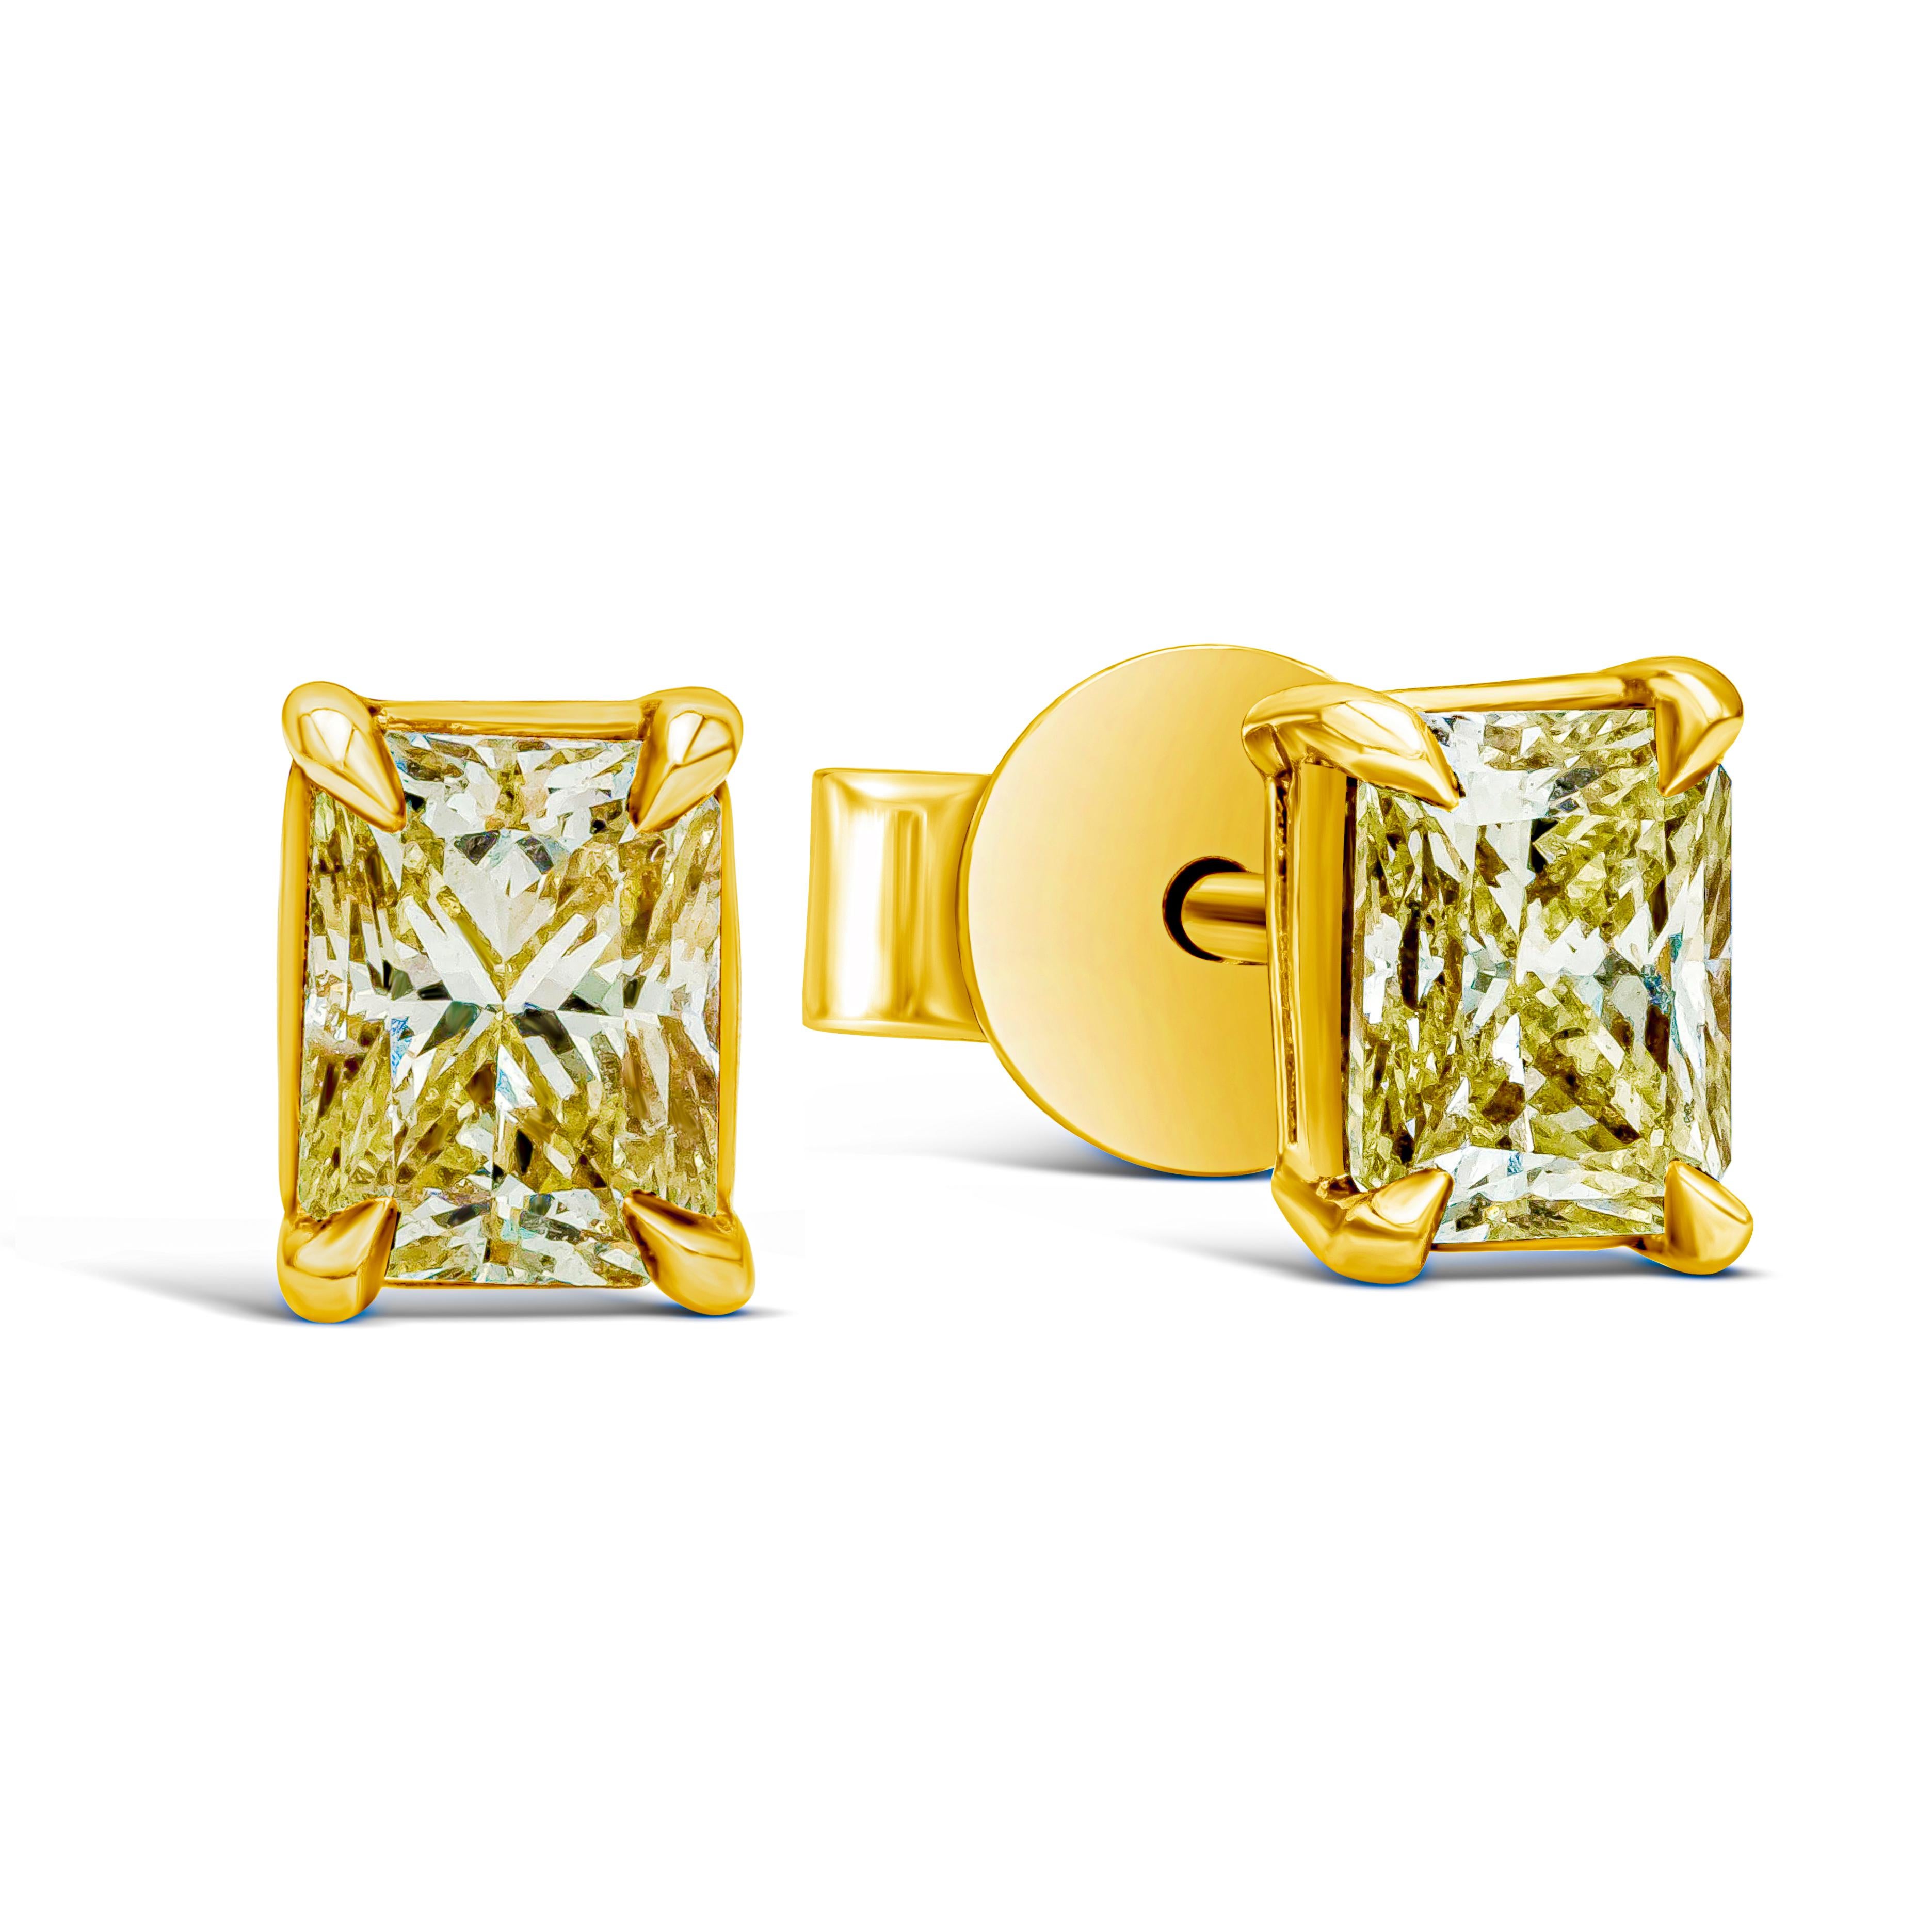 Features a versatile yellow diamond stud earrings showcasing 2 elongated radiant cut diamonds weighing 1.07 carats total, Fancy Intense Yellow and VS in Clarity. Set in a 4-prong basket, Made with 18K Yellow Gold. 

Roman Malakov is a custom house,